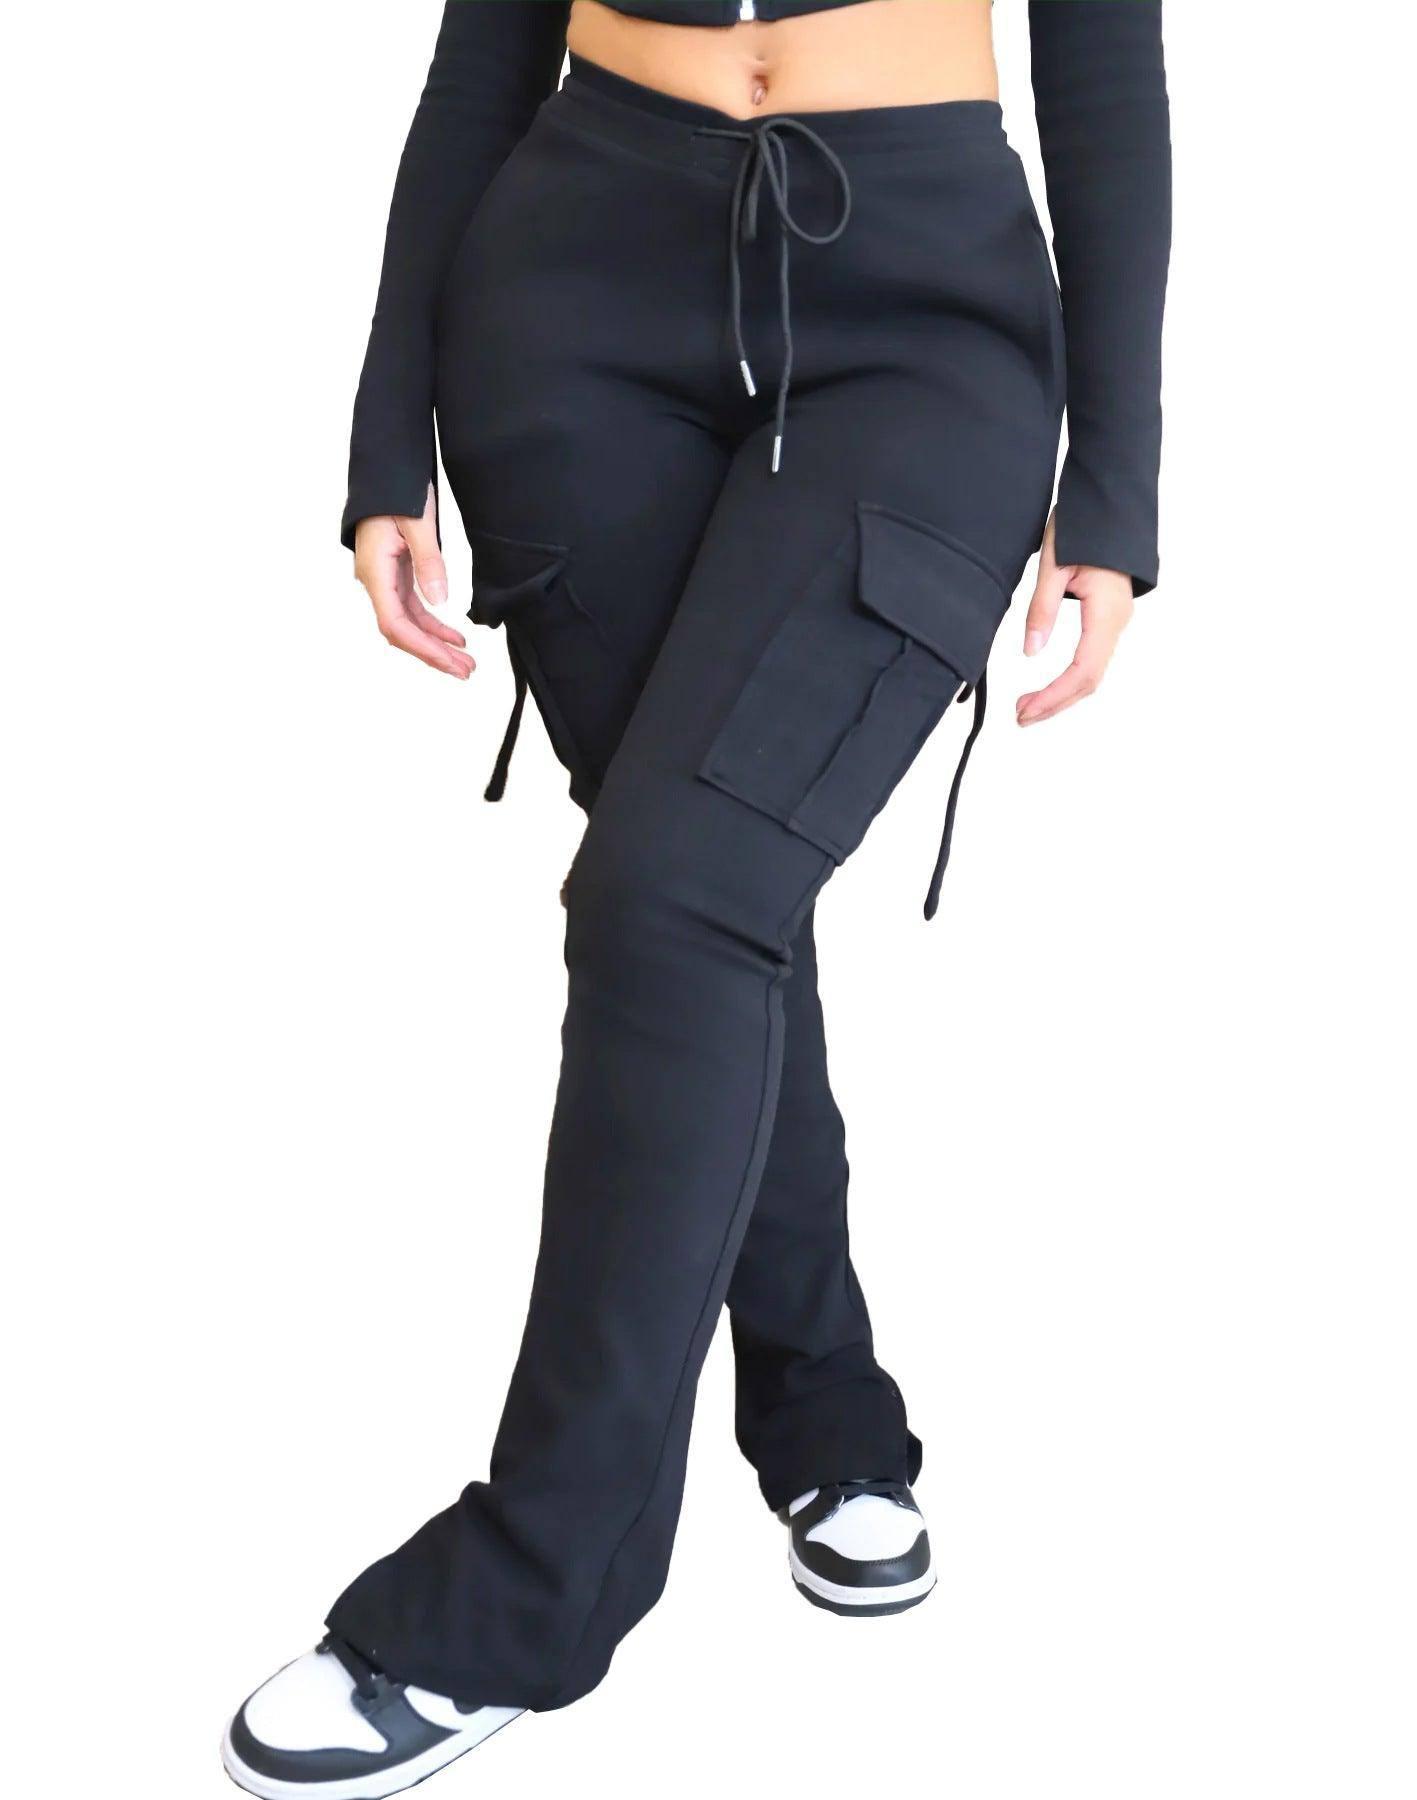 Women's Casual Tight Sportswear Multi-pocket Overalls With-Black pants-19